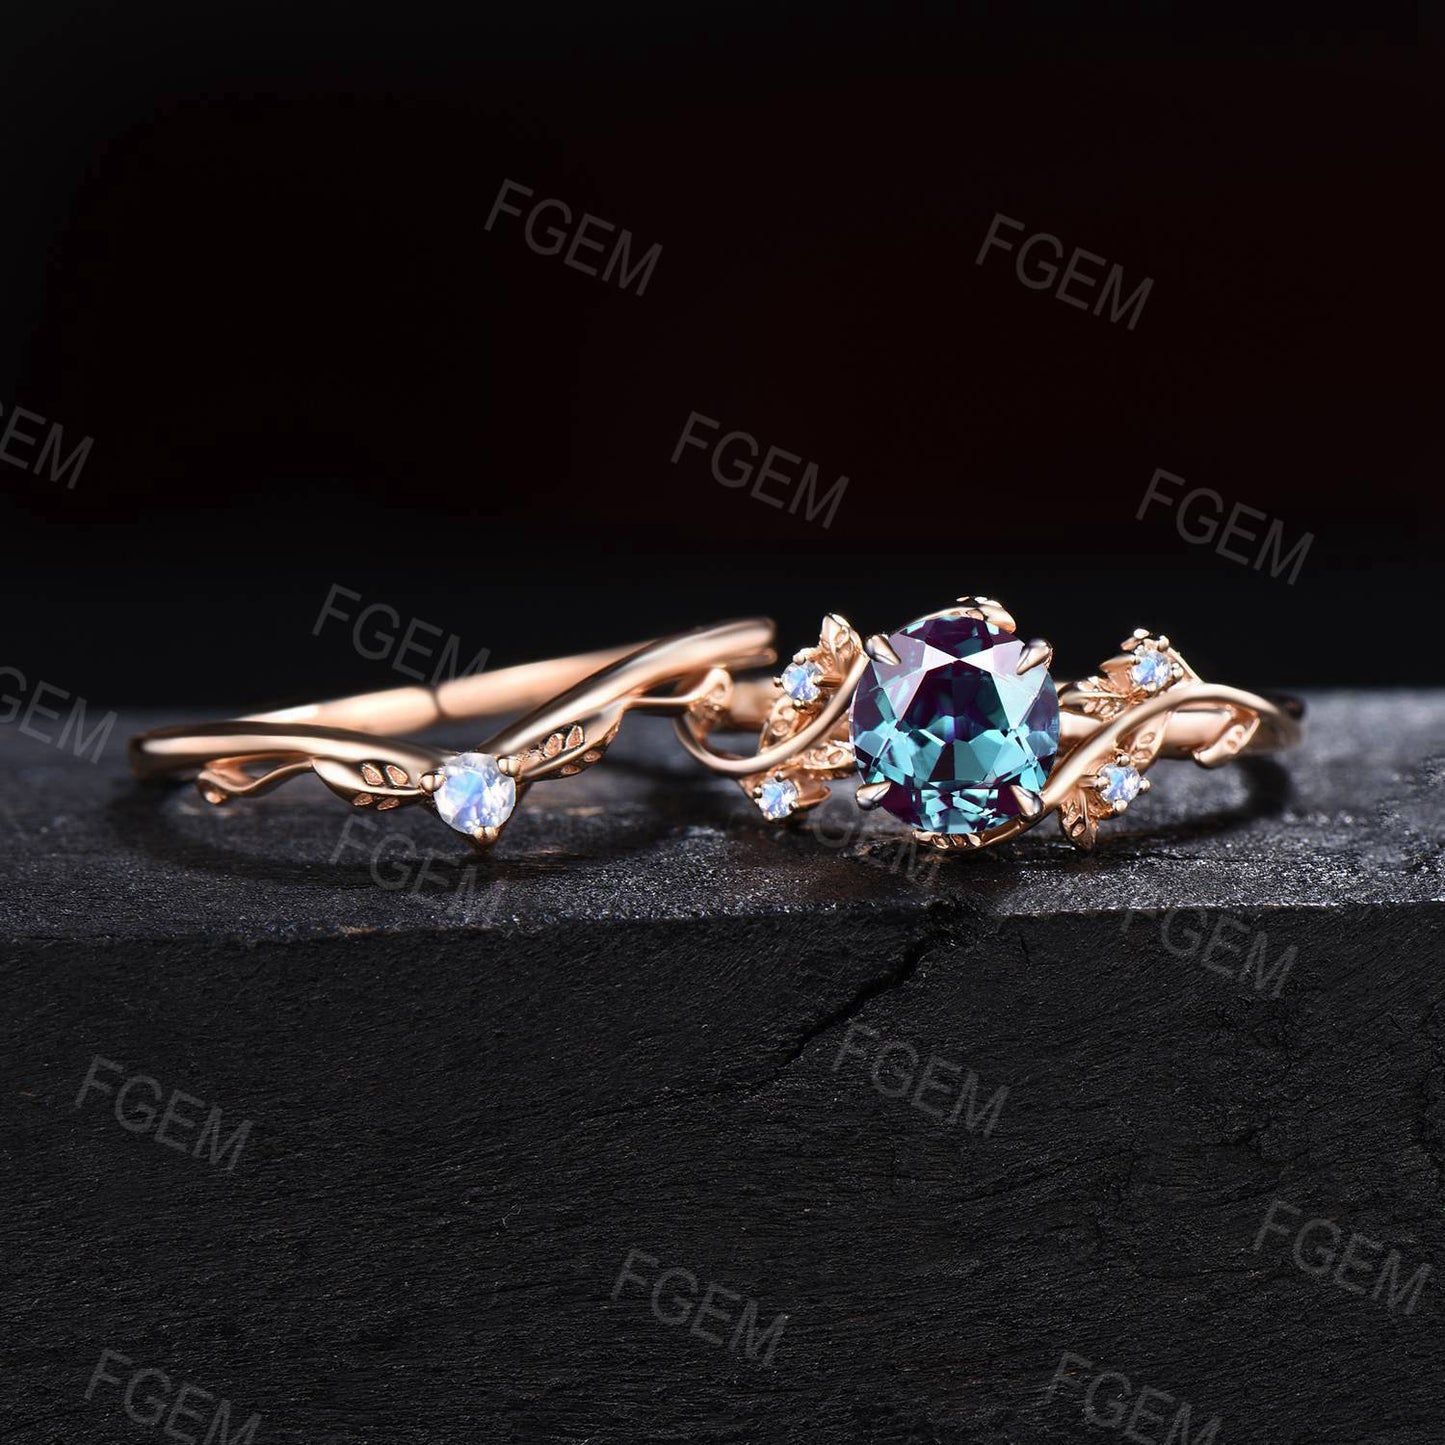 1ct Round Color-Change Alexandrite Engagement Ring Solid Gold Branch Vine Moonstone Bridal Set Leaves Ring Set June Birthstone Jewelry Gifts